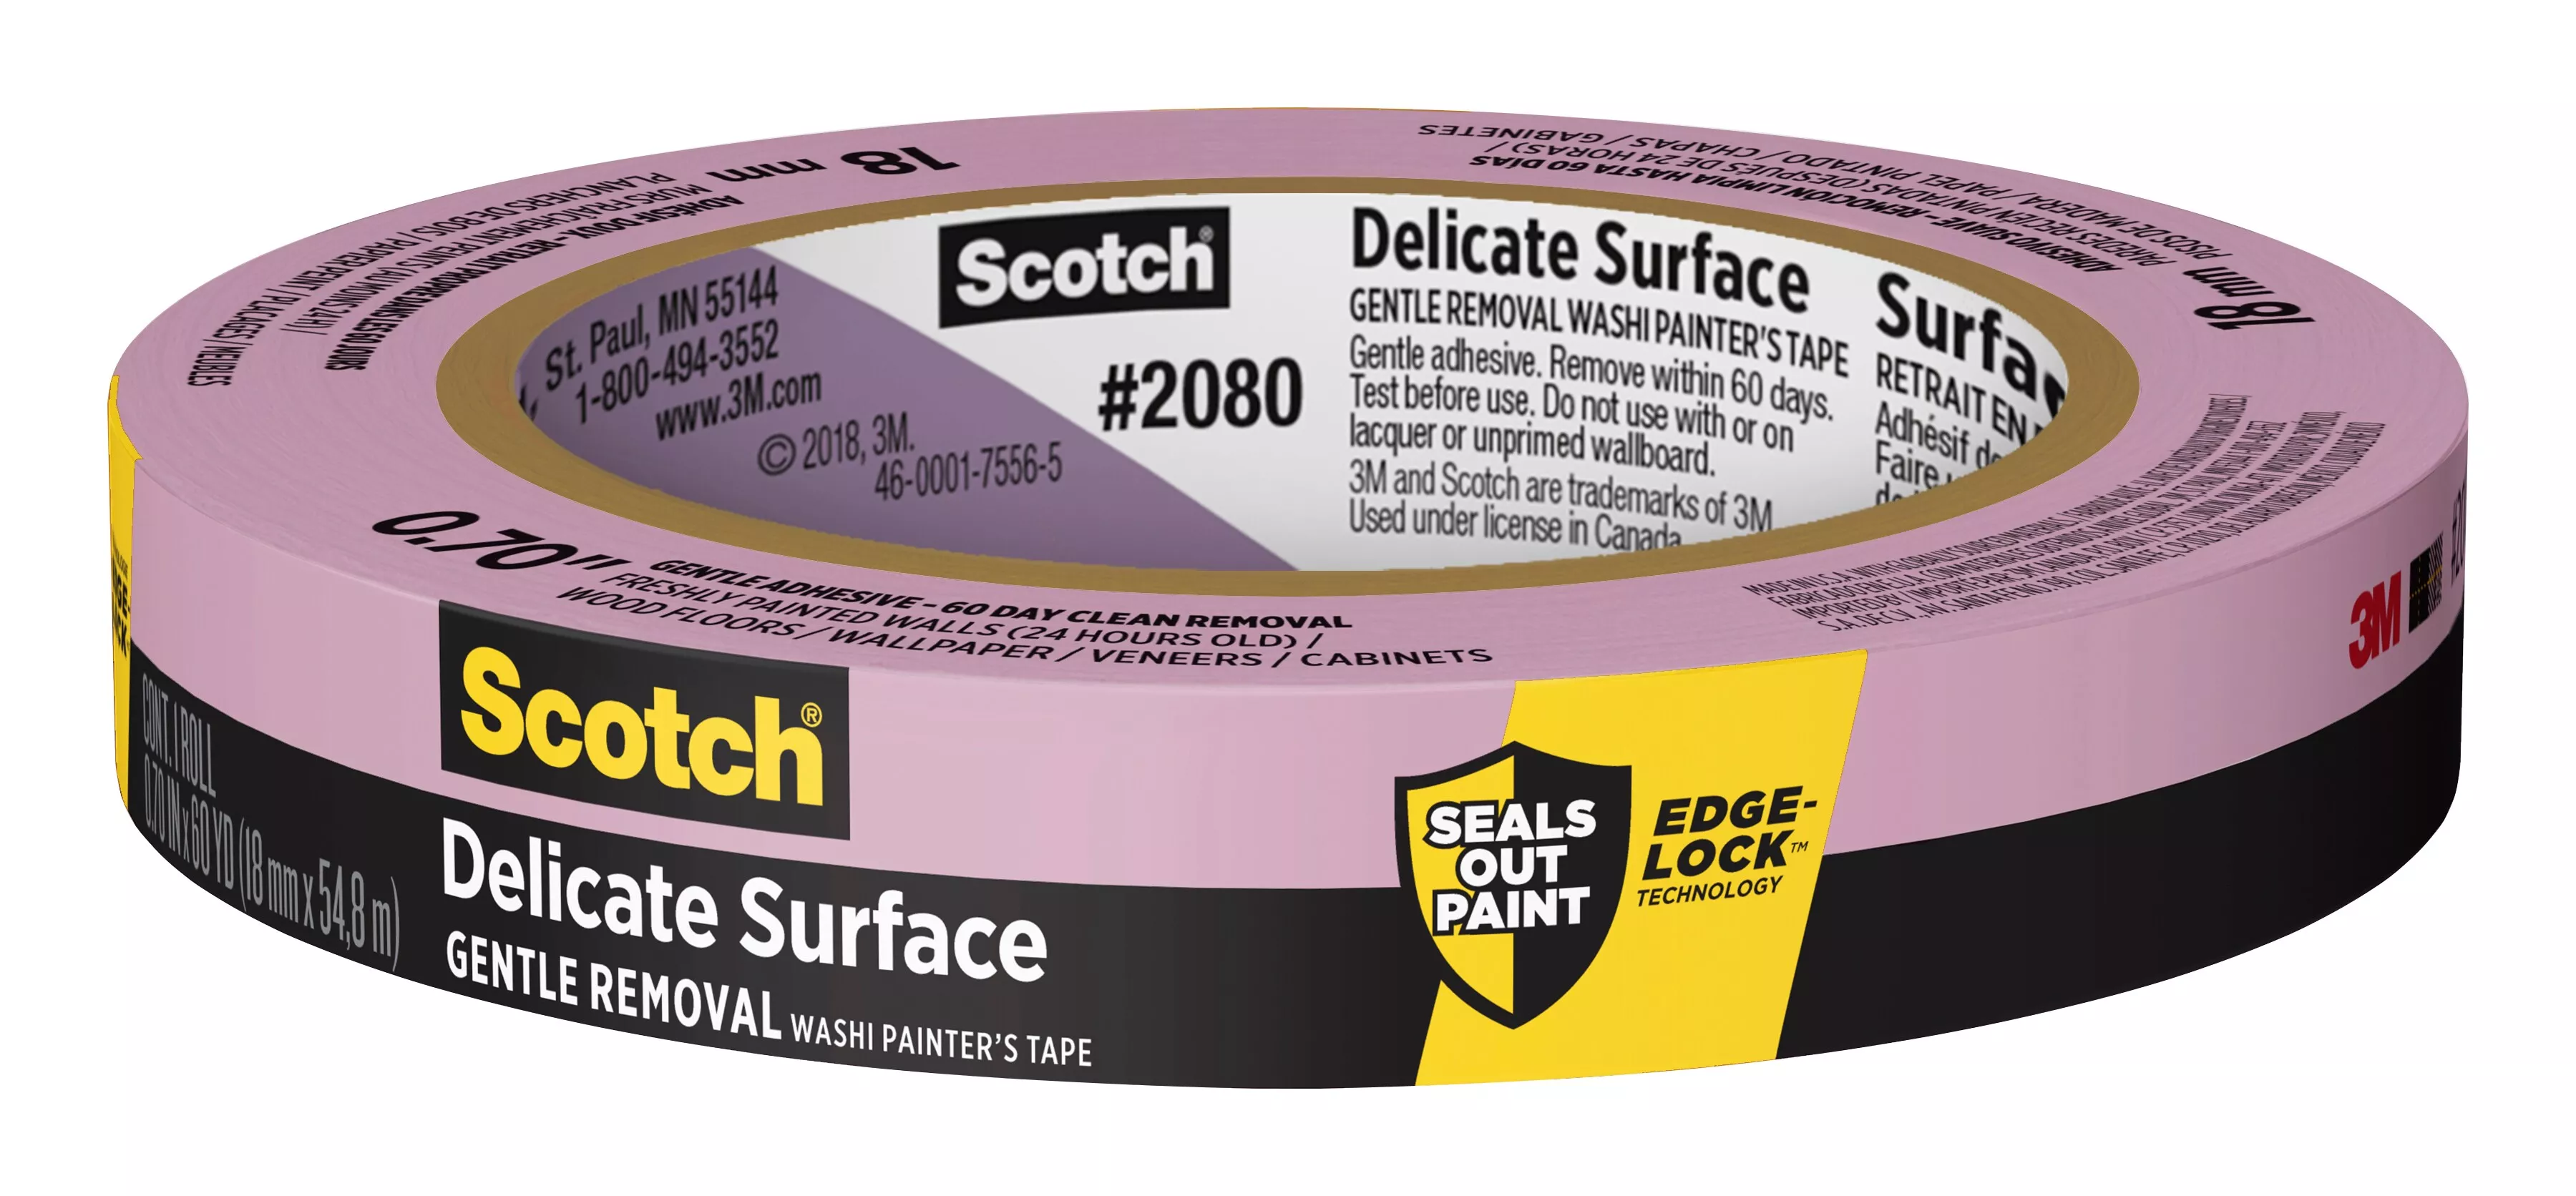 Scotch® Delicate Surface Painter's Tape 2080-18EC, 0.70 in x 60 yd (18mm
x 54,8m)